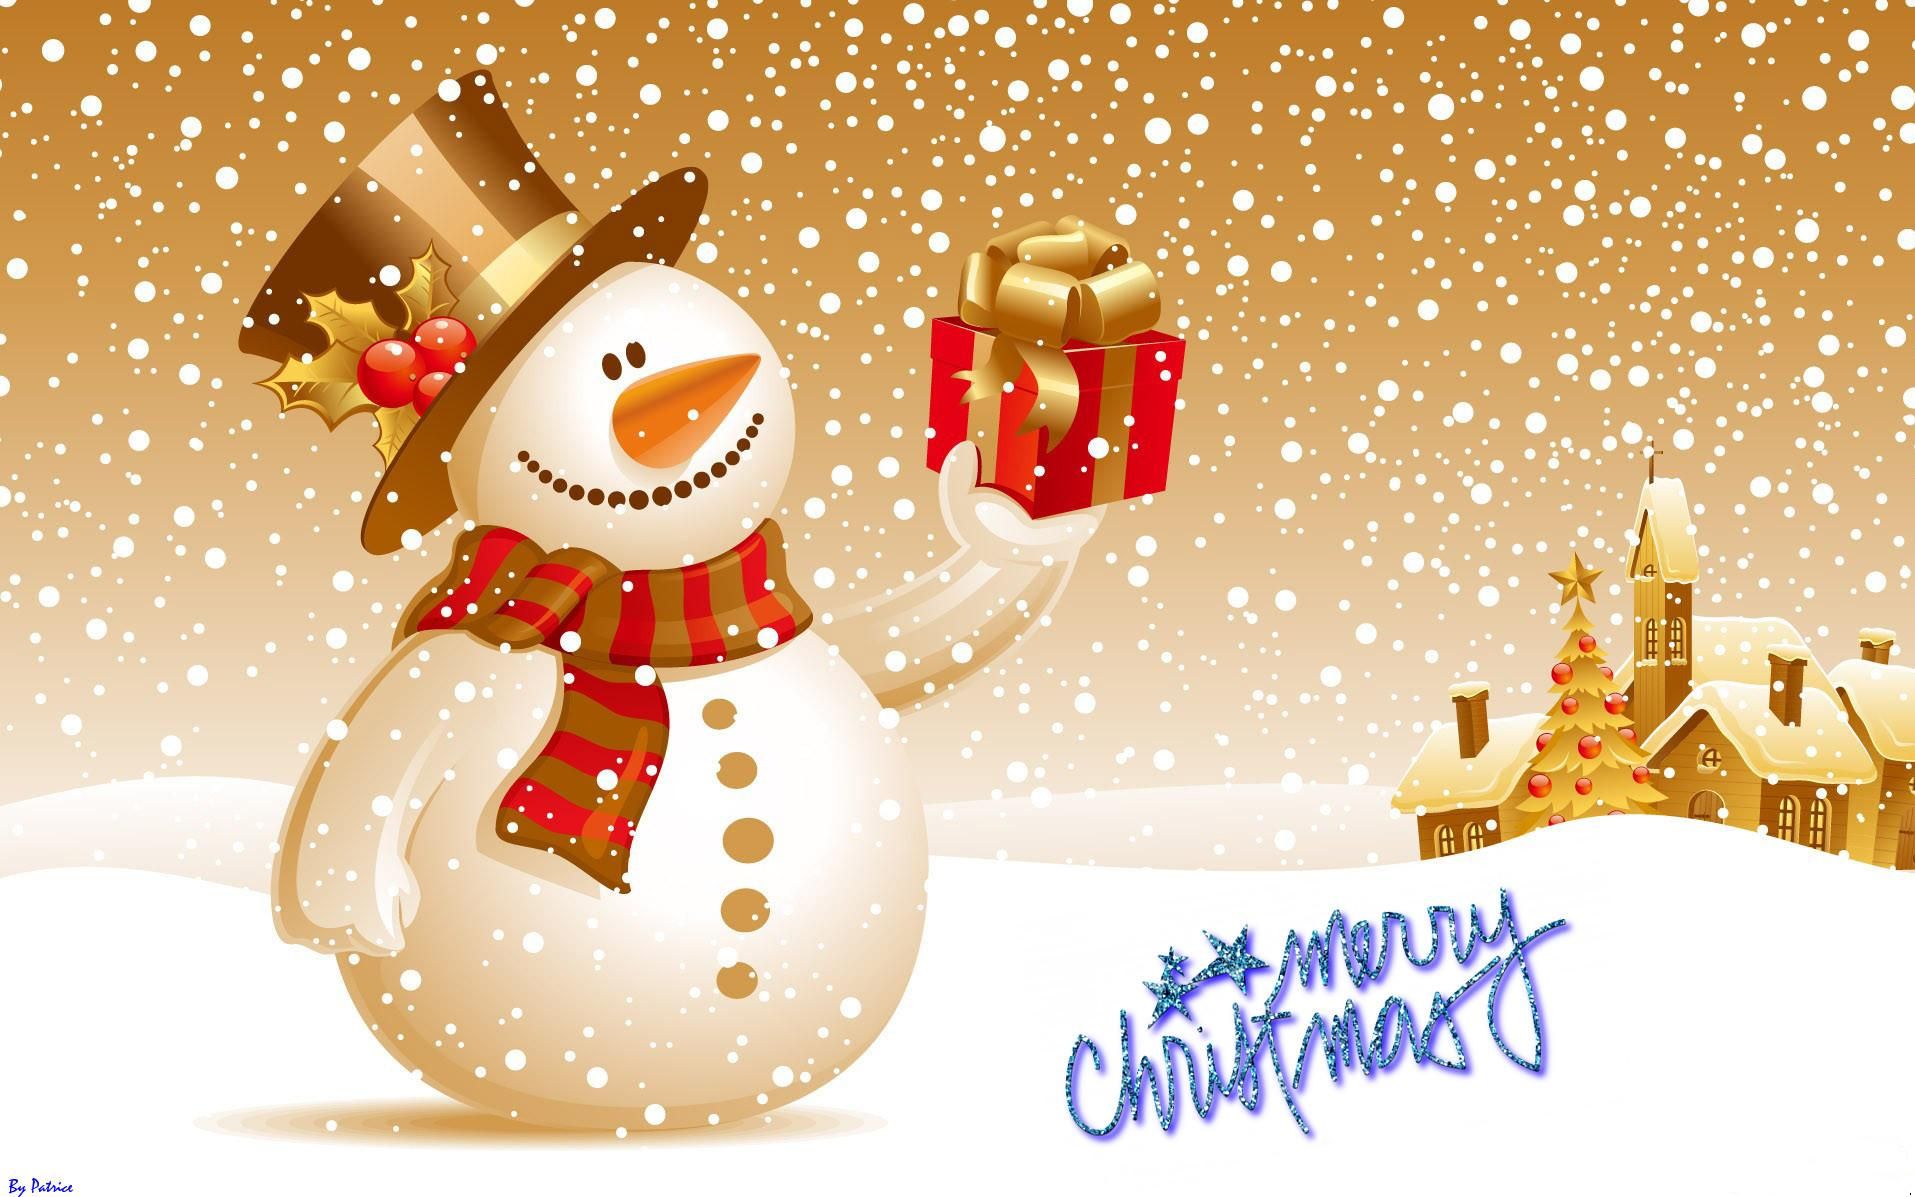 Merry christmas 2015 Images Pictures Wallpapers free | Happy New ...